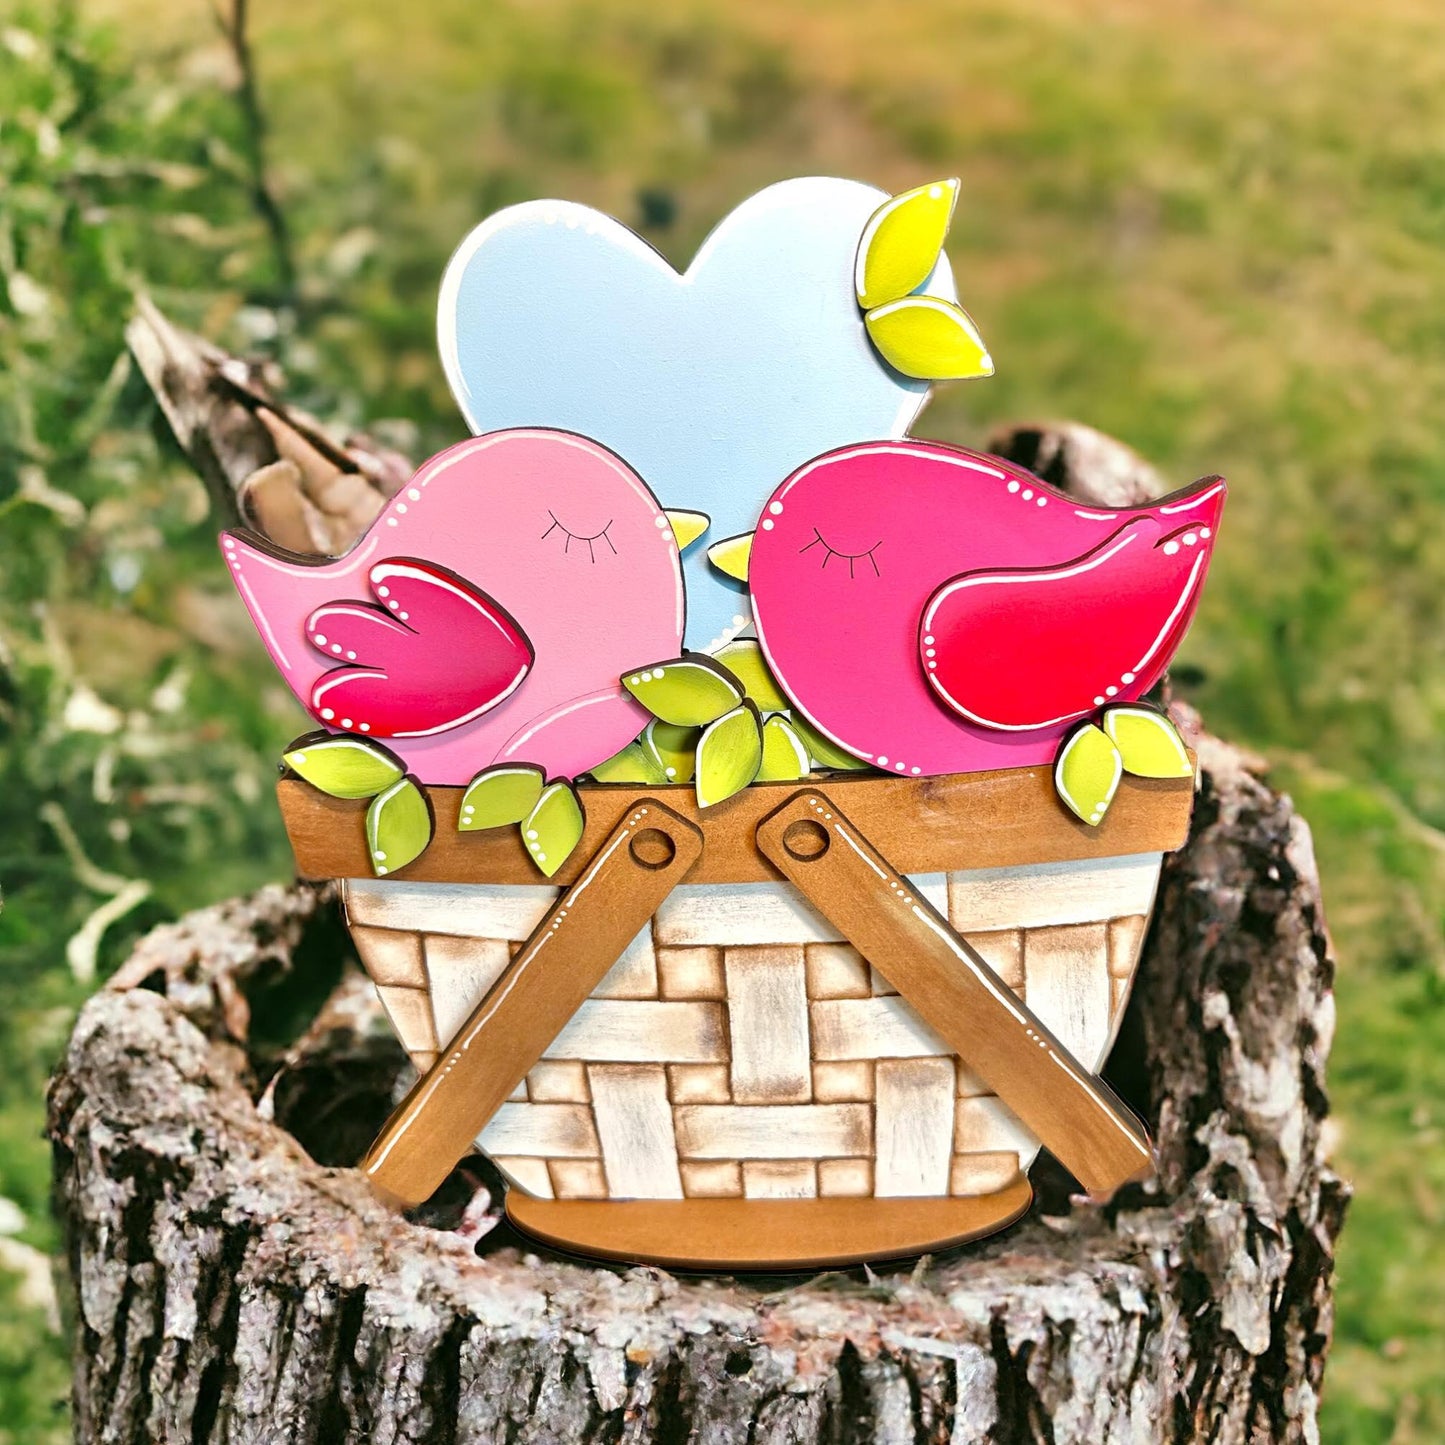 Love Birds Valentine For The Flower Basket Decor - Wood Blank for Painting - Inserts for Basket - RusticFarmhouseDecor